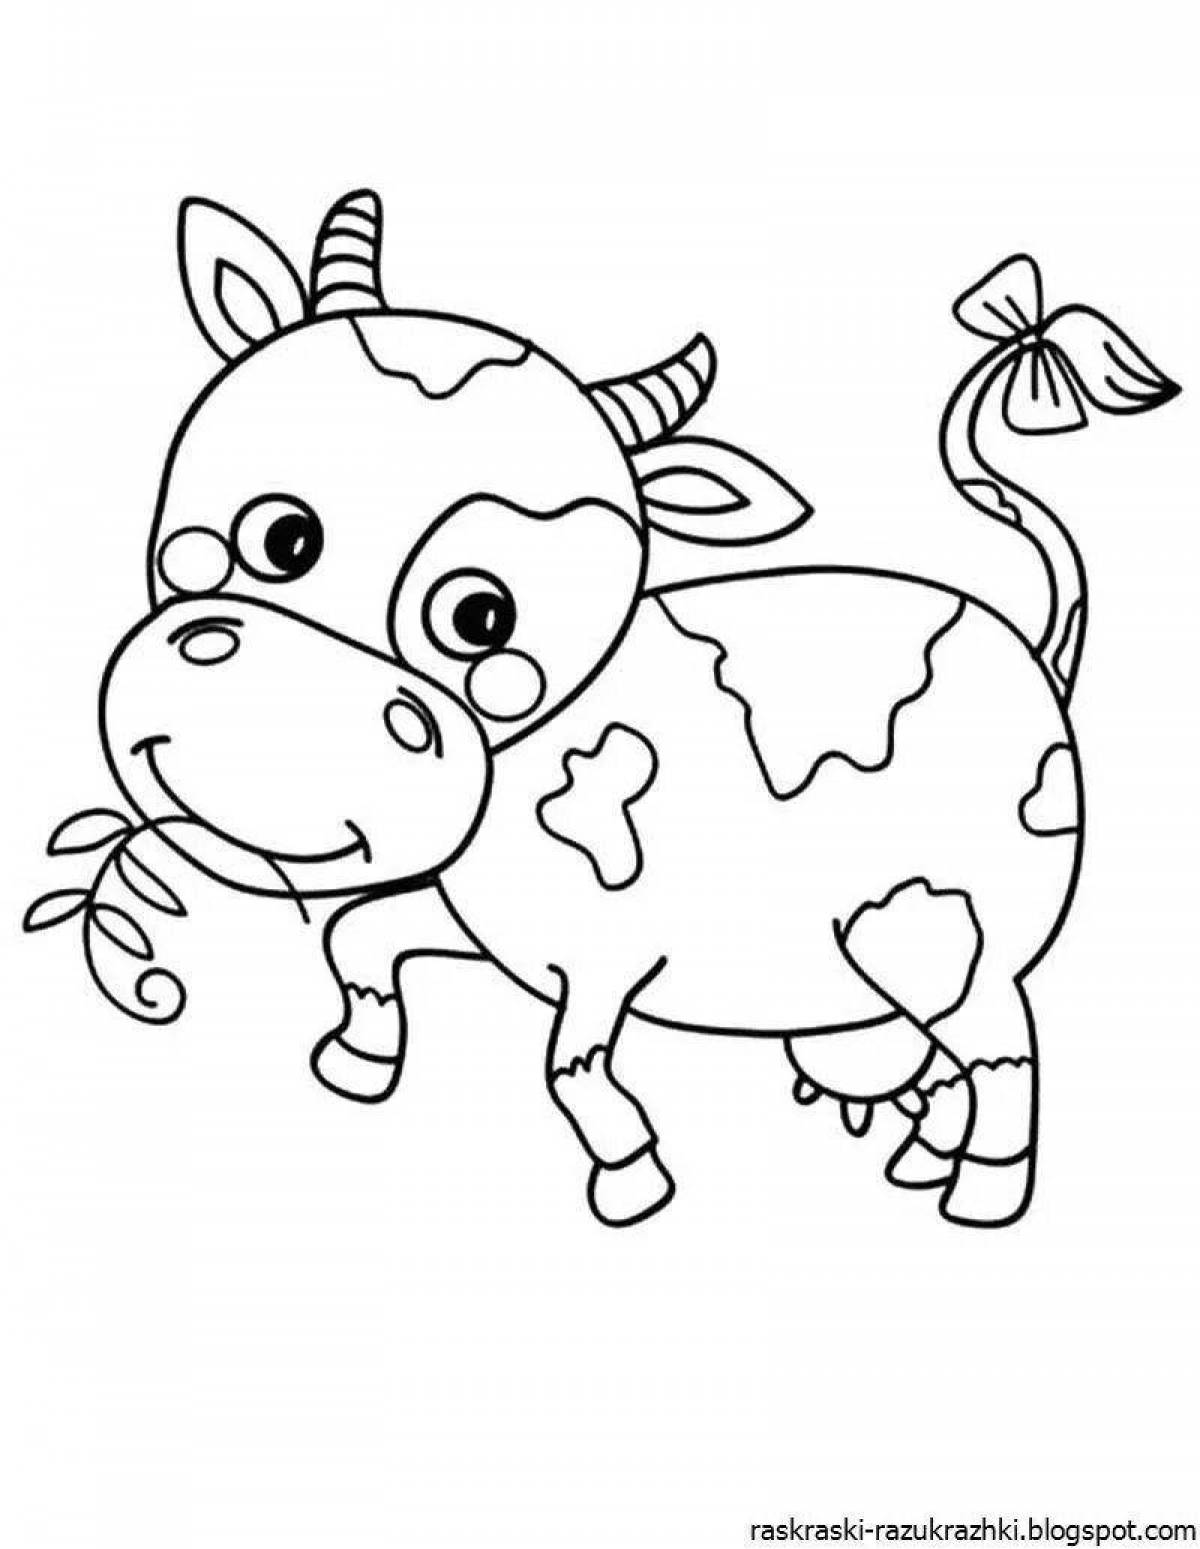 Colorful cow coloring page for kids